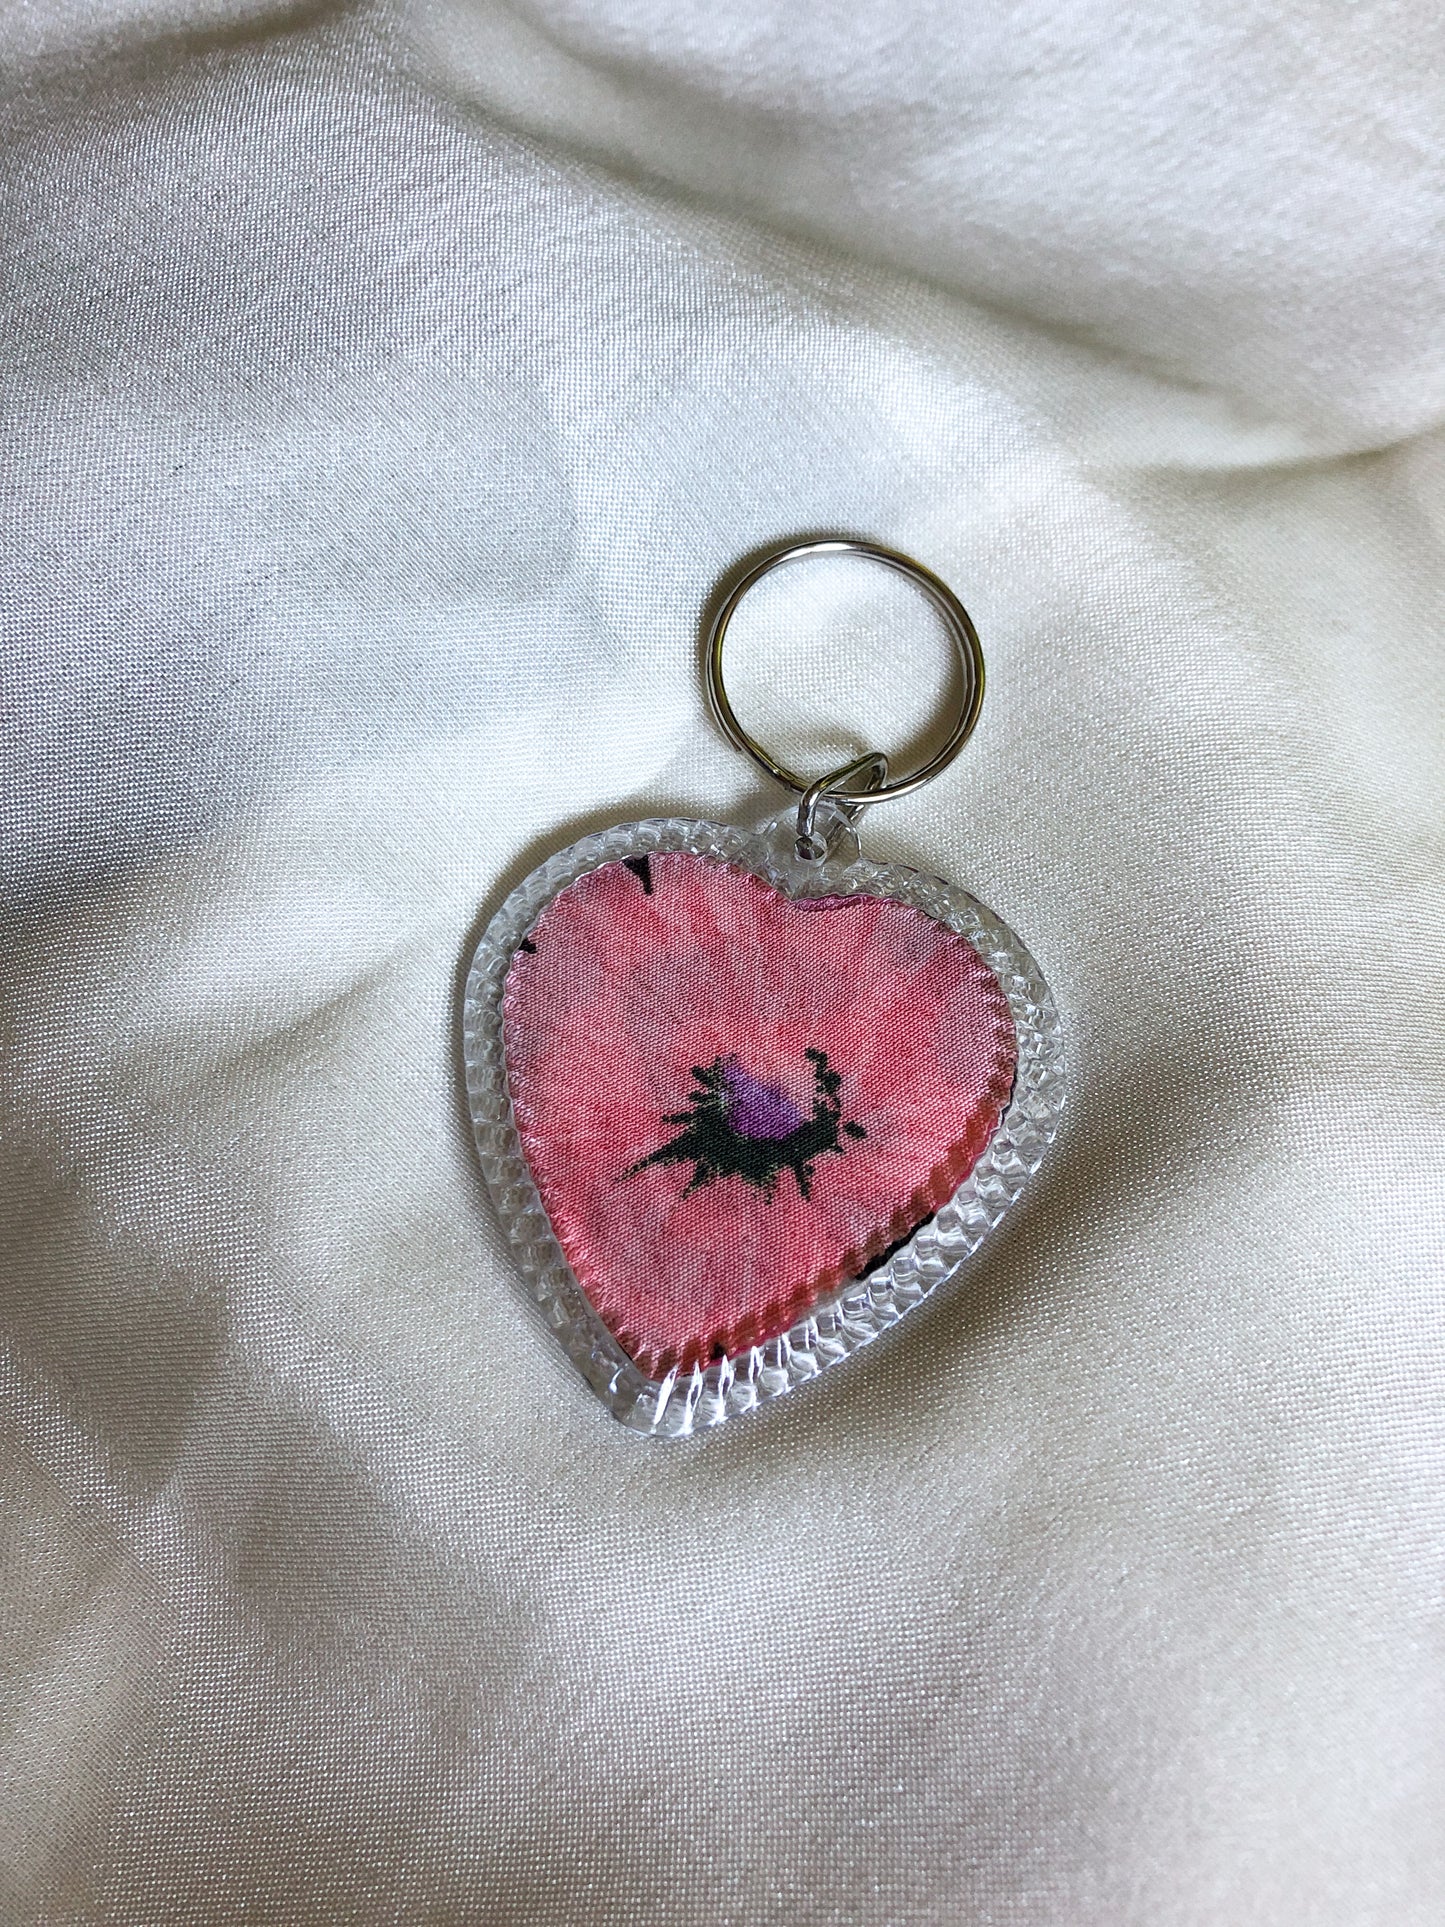 Heart Shaped Keyring - Pink Leopard and Flower - Upcycled - Duo Design